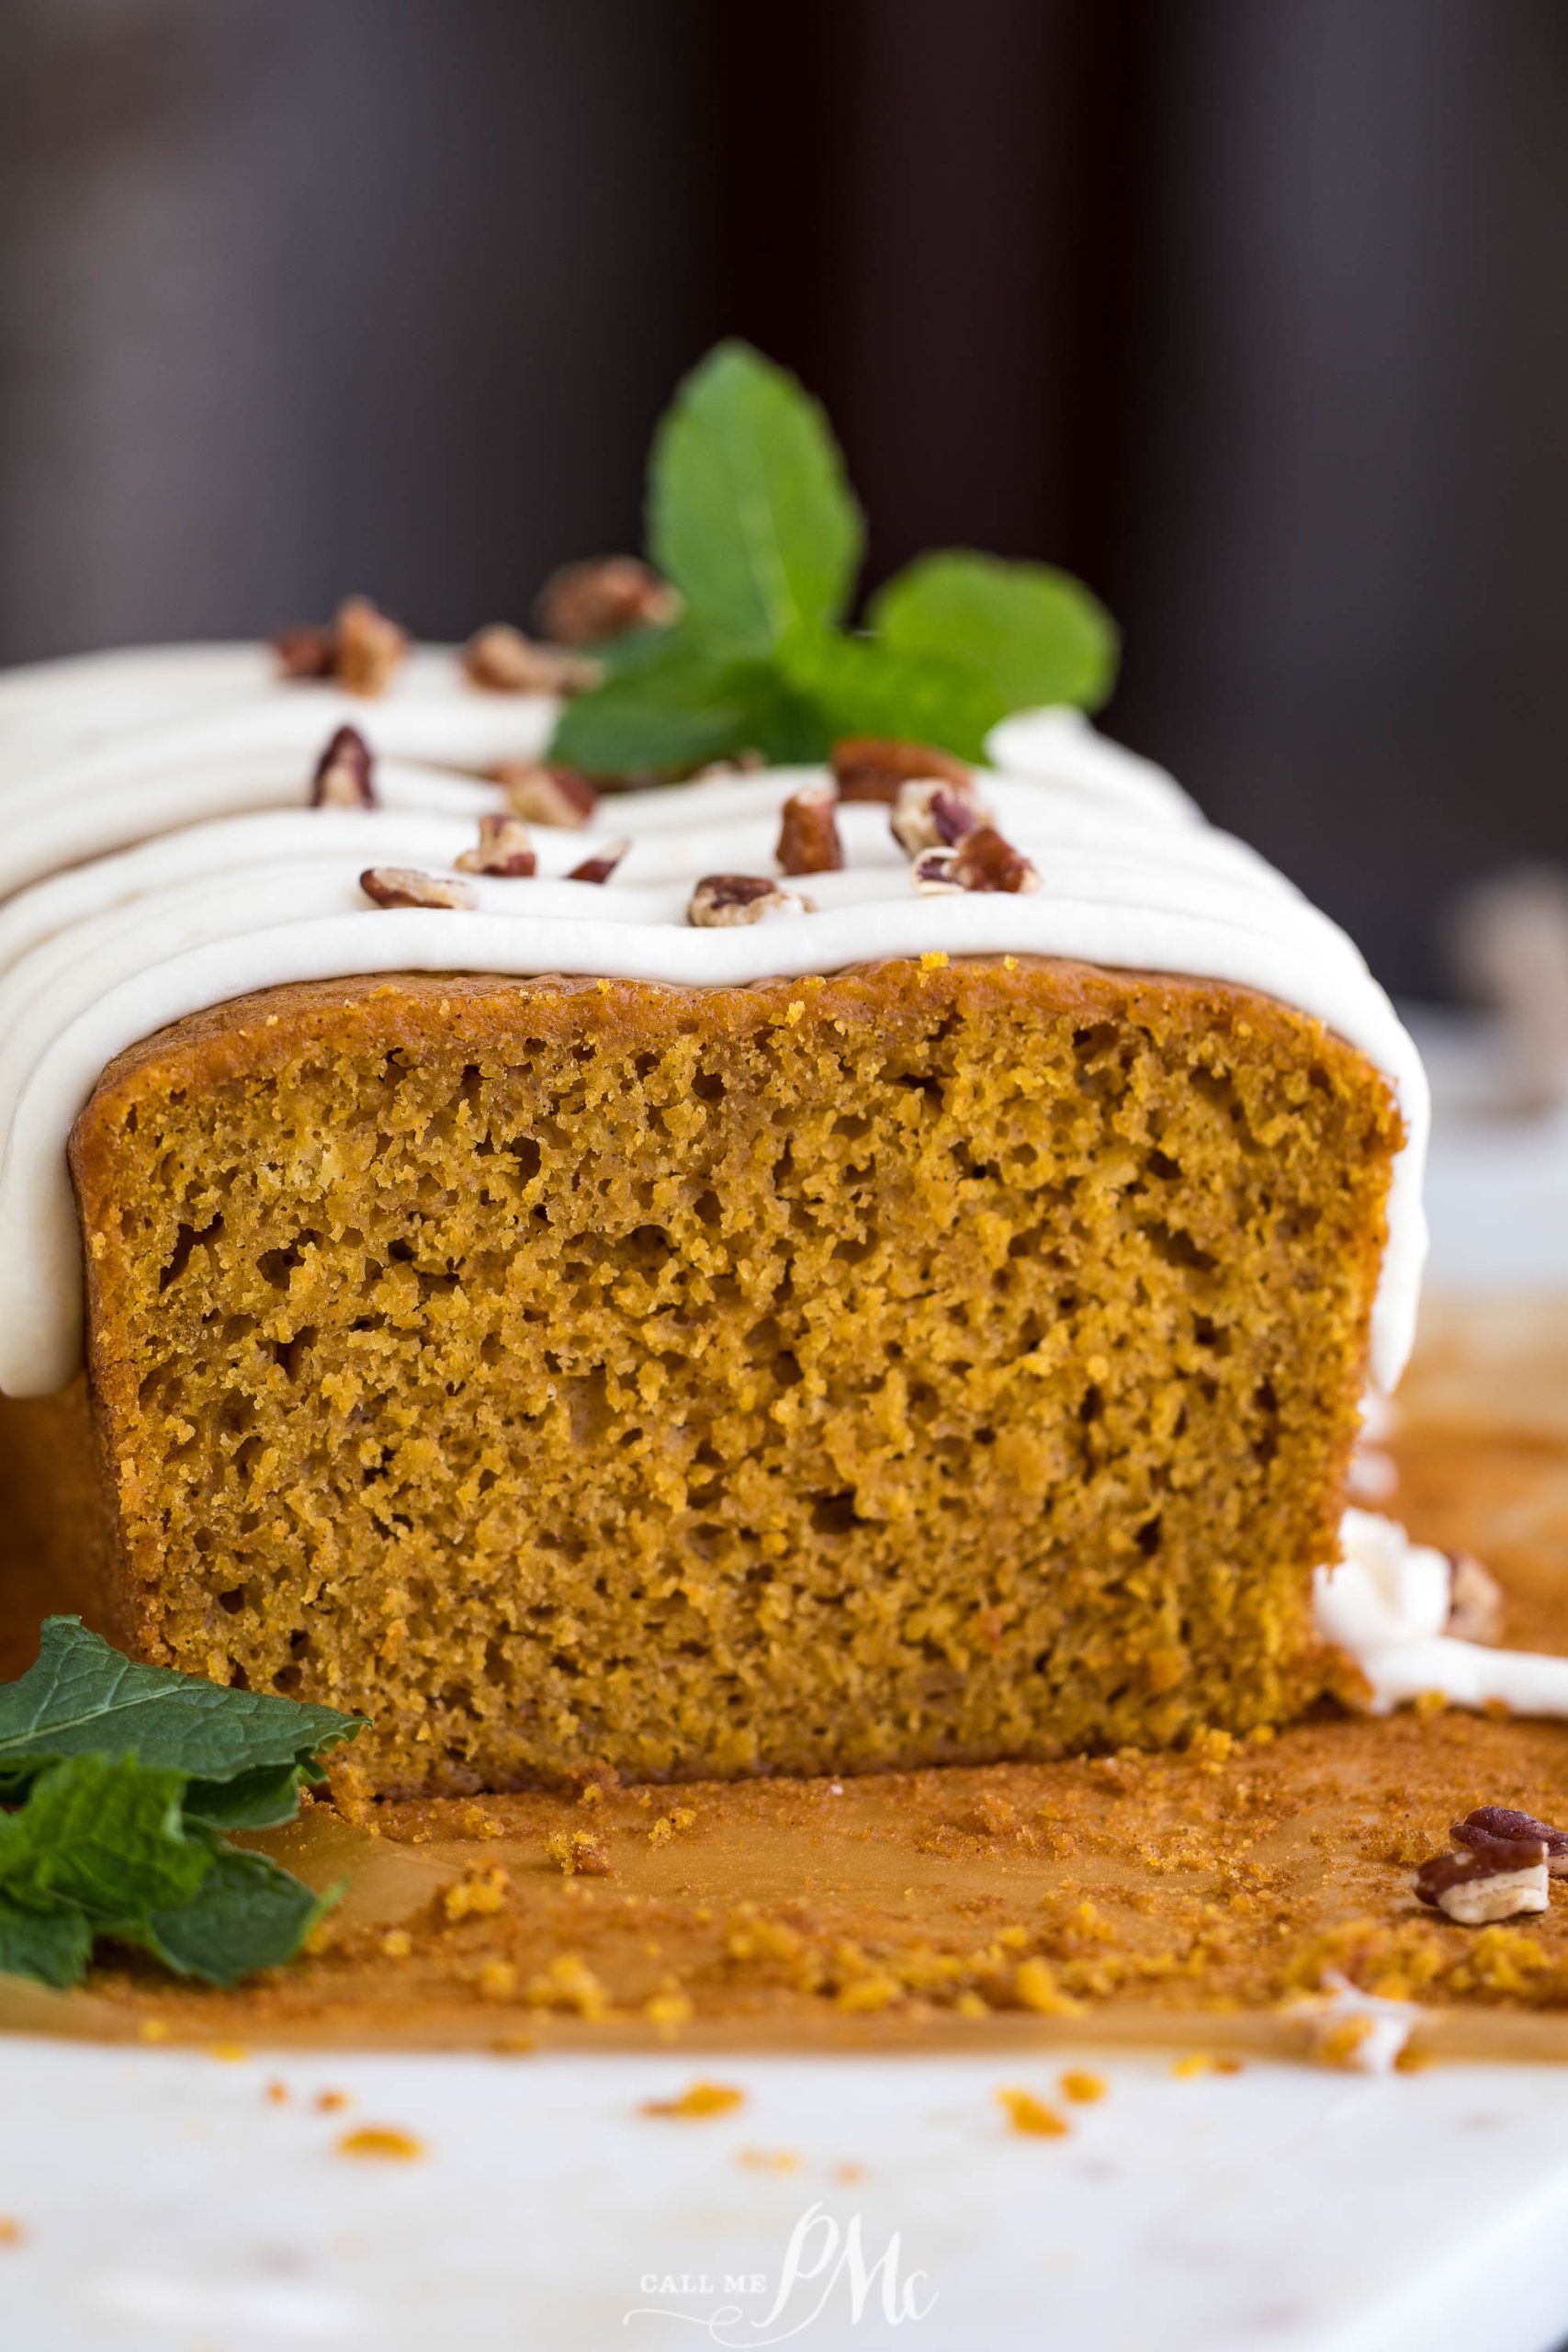 A slice of pumpkin bread with icing and mint leaves